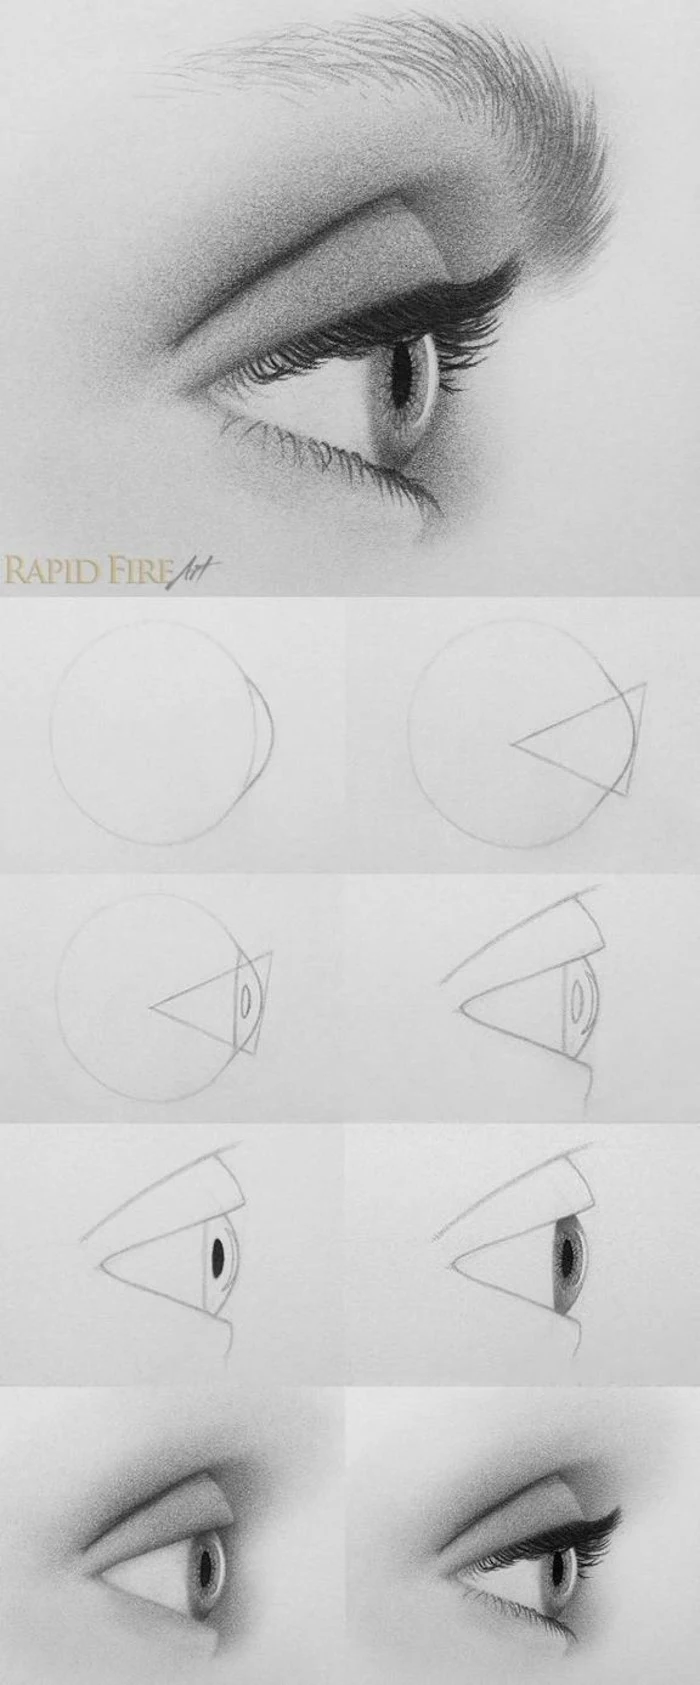 step by step diy tutorial in eight steps, drawing an eye from the side profile, eye drawing easy, black pencil sketch